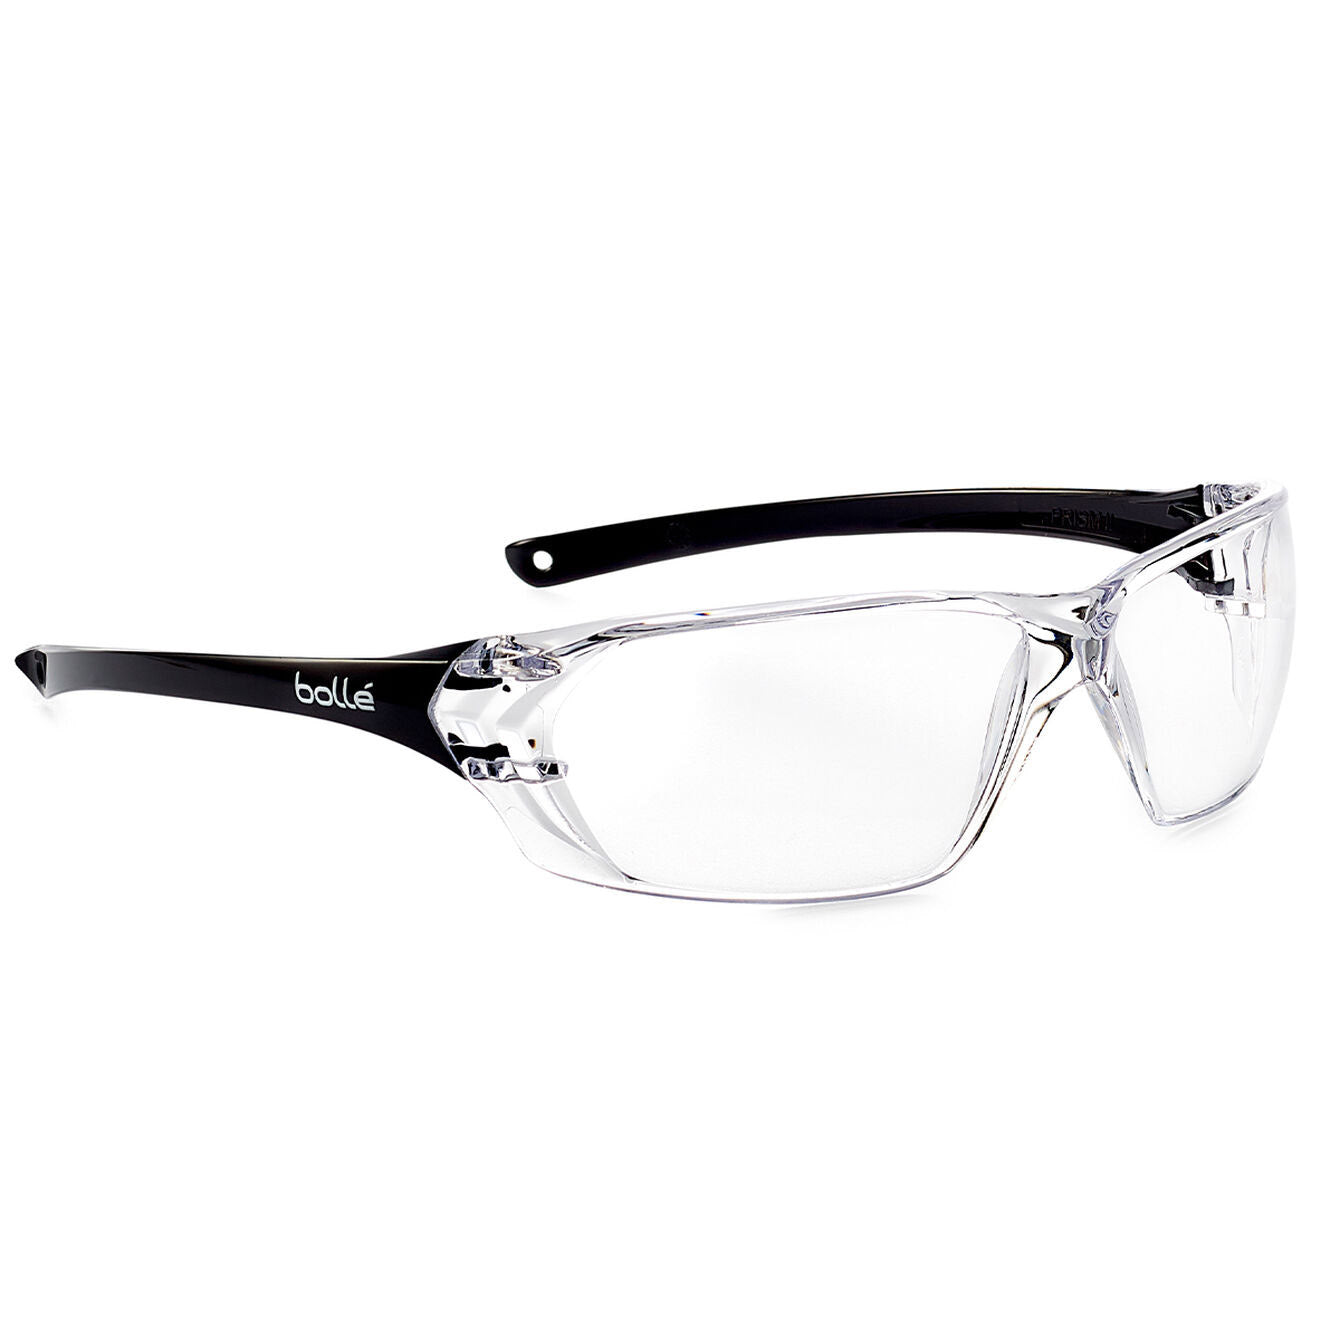 Bolle PRISM PRIPSI Safety Glasses Clear Lens